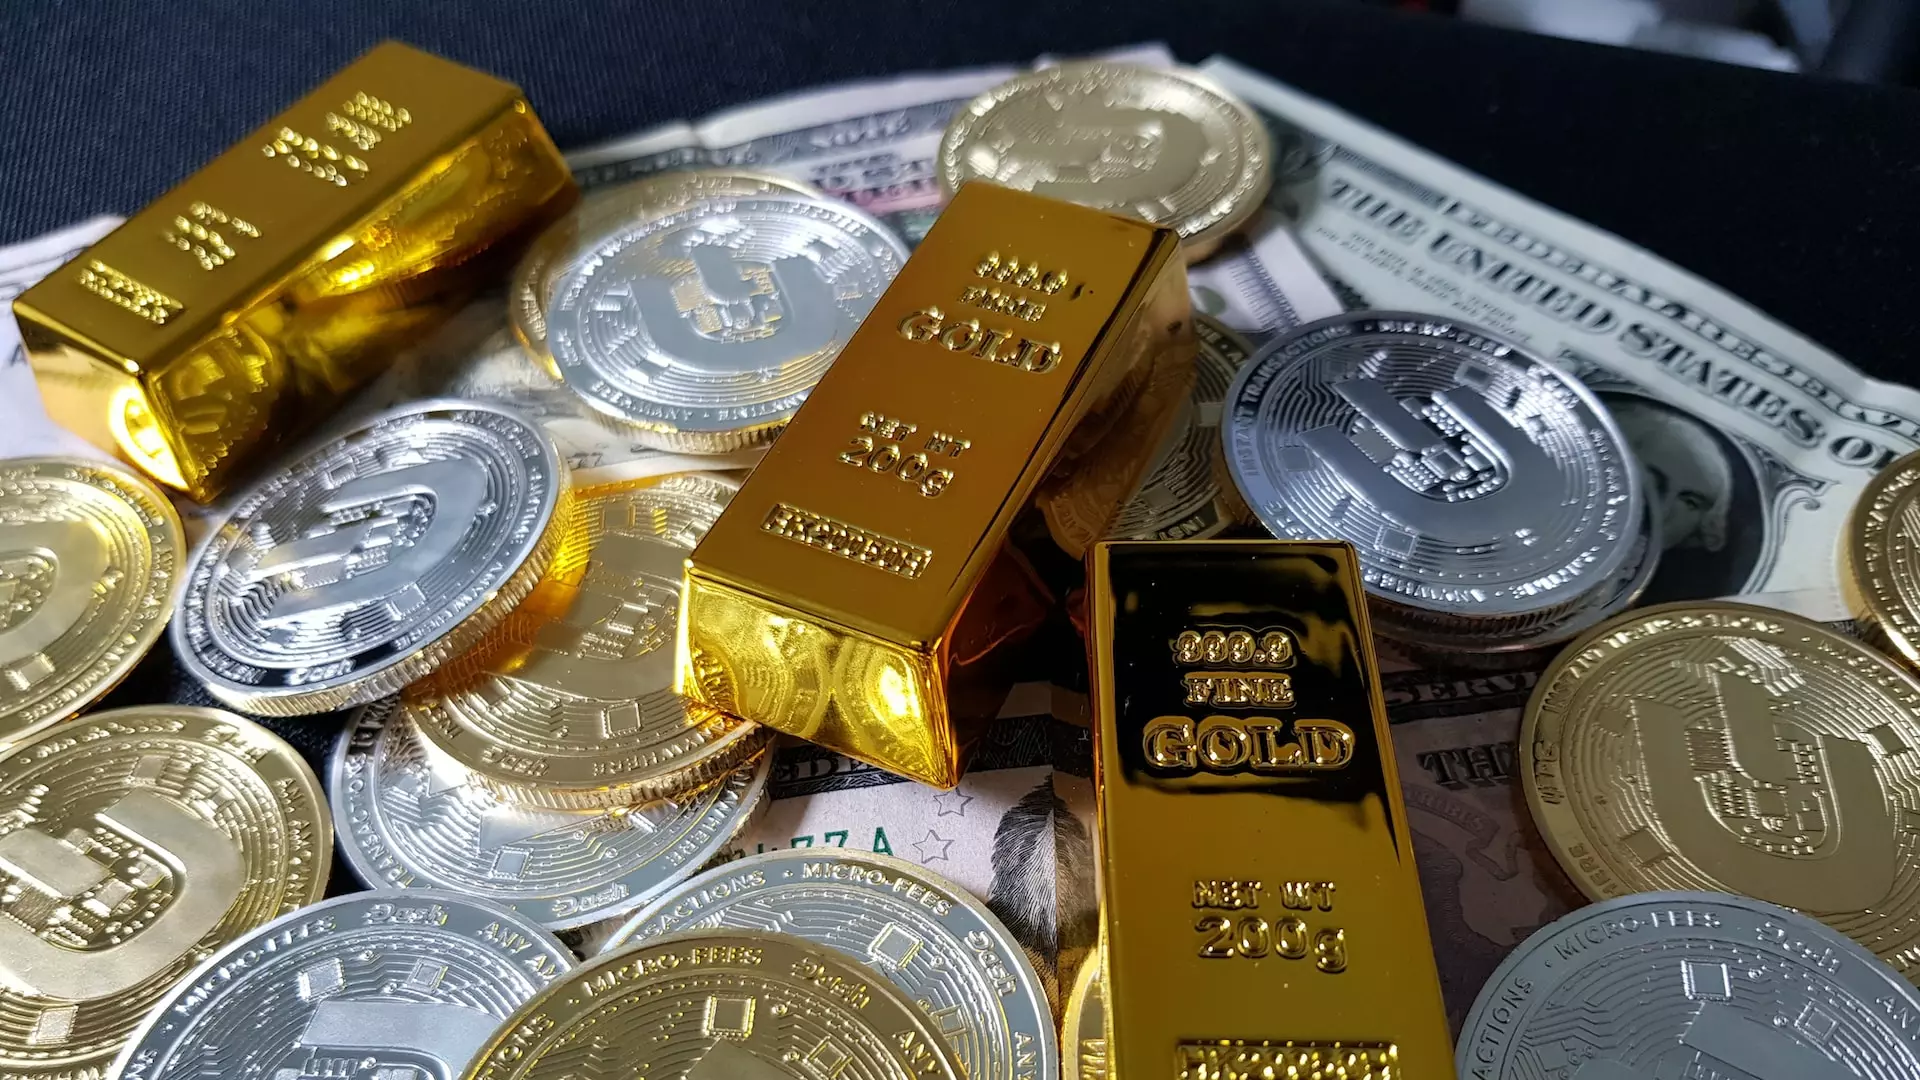 Gold bullion and physical cryptocurrency coins